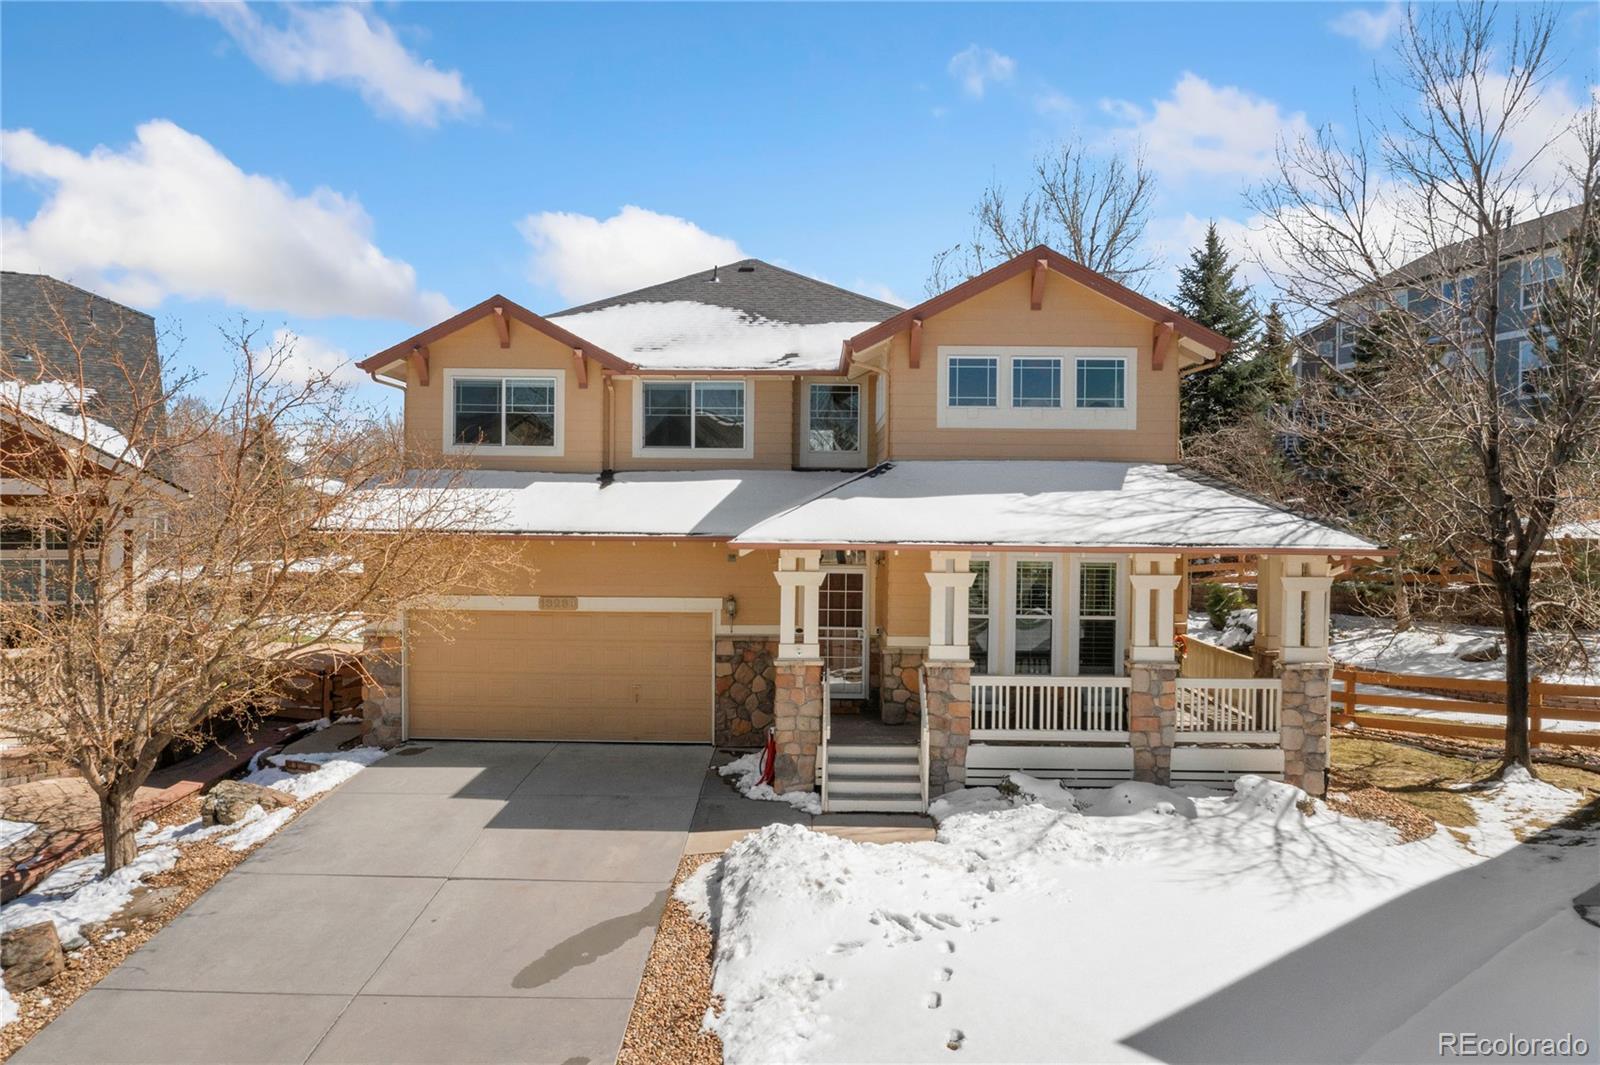 13238 W 84th Place, arvada MLS: 7661859 Beds: 4 Baths: 3 Price: $889,000